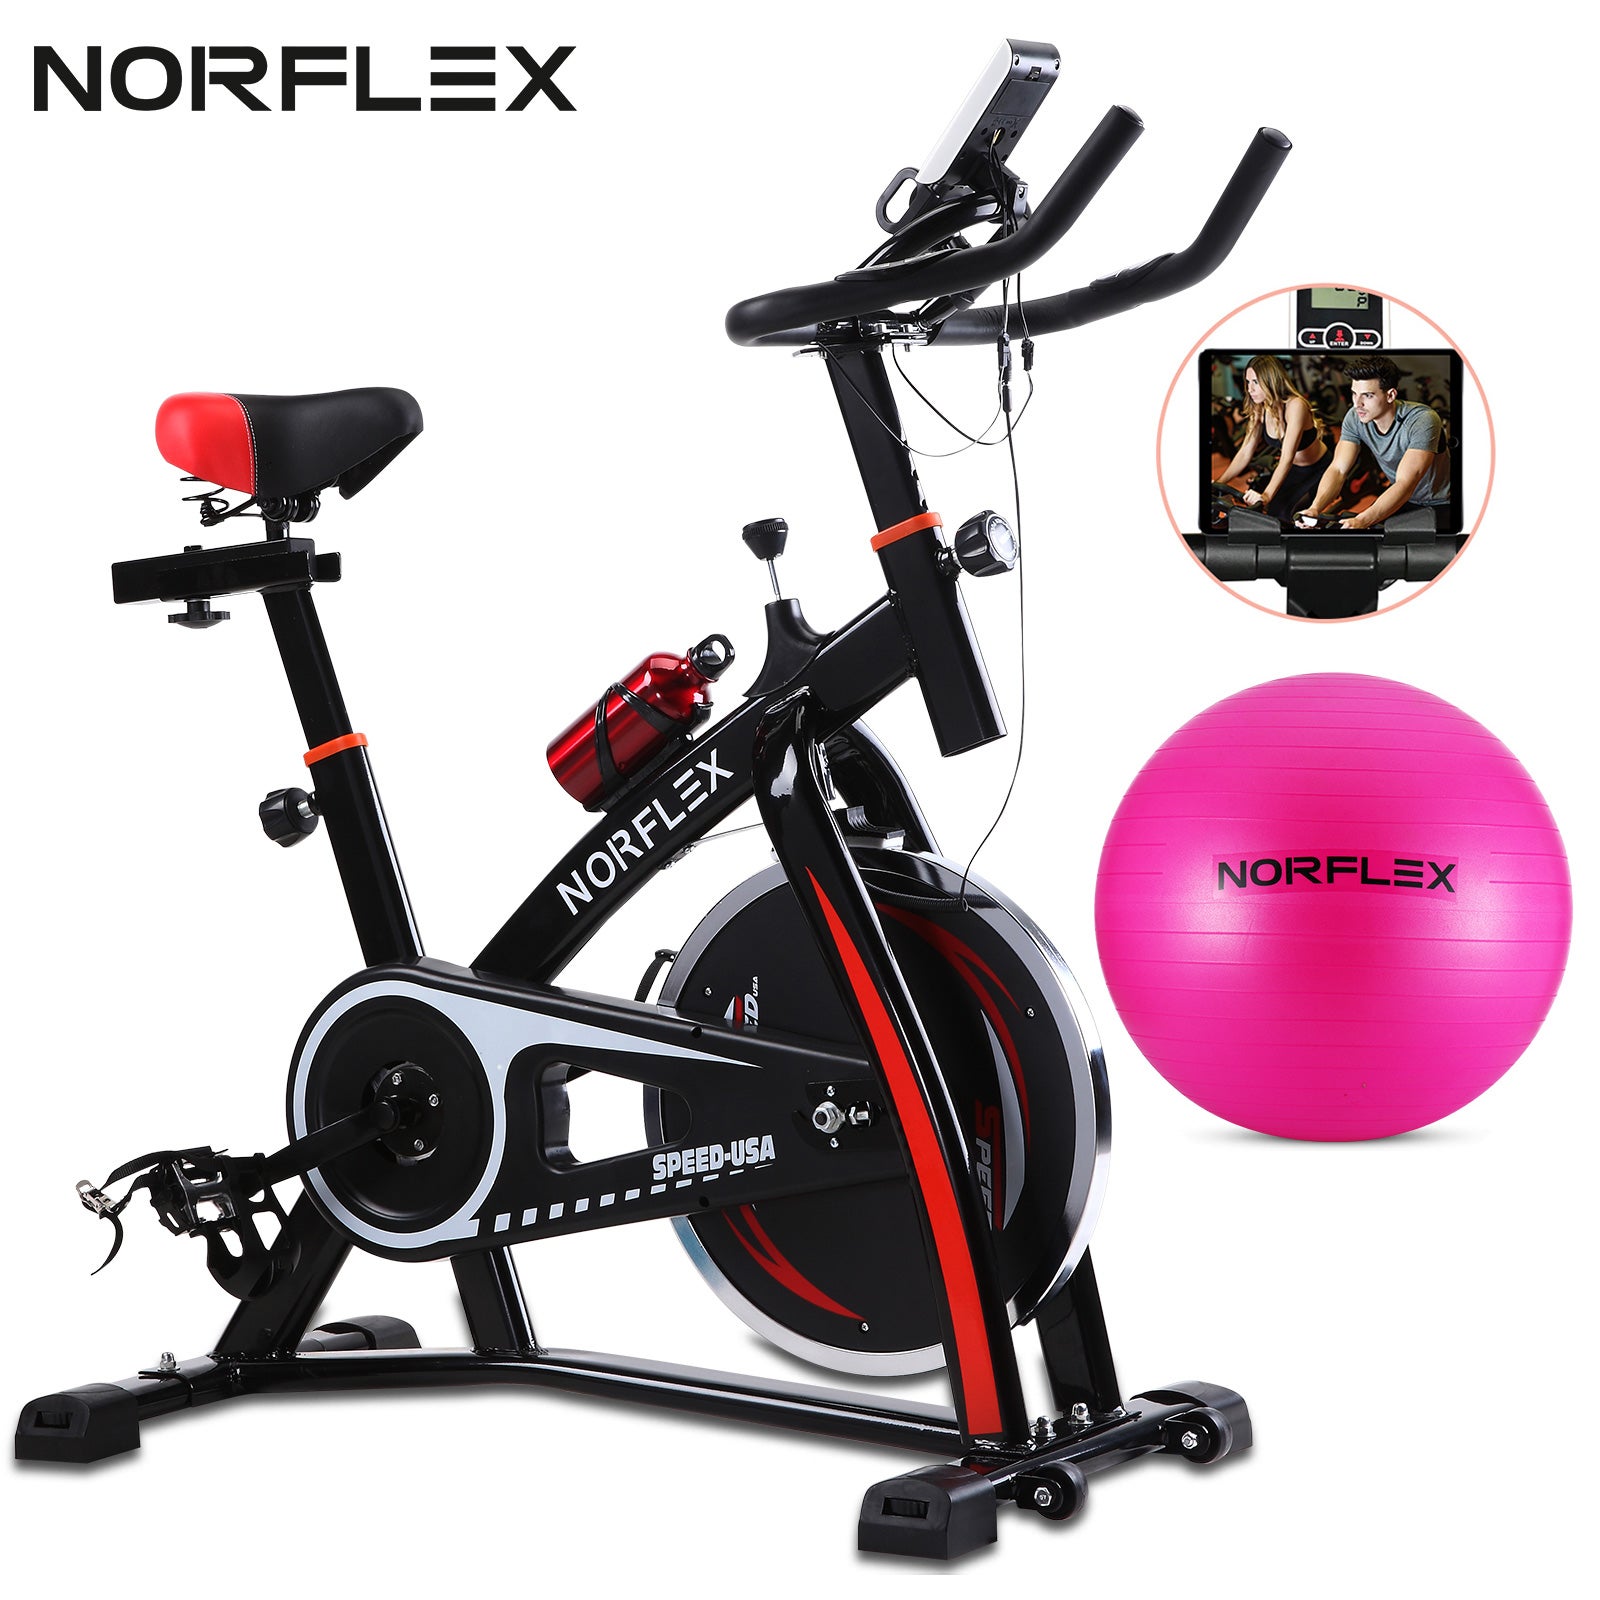 NEW LUXE FOLDABLE EXERCISE BIKE WHITE FITNESS WEIGHT LOSS MACHINE HOME GYM 